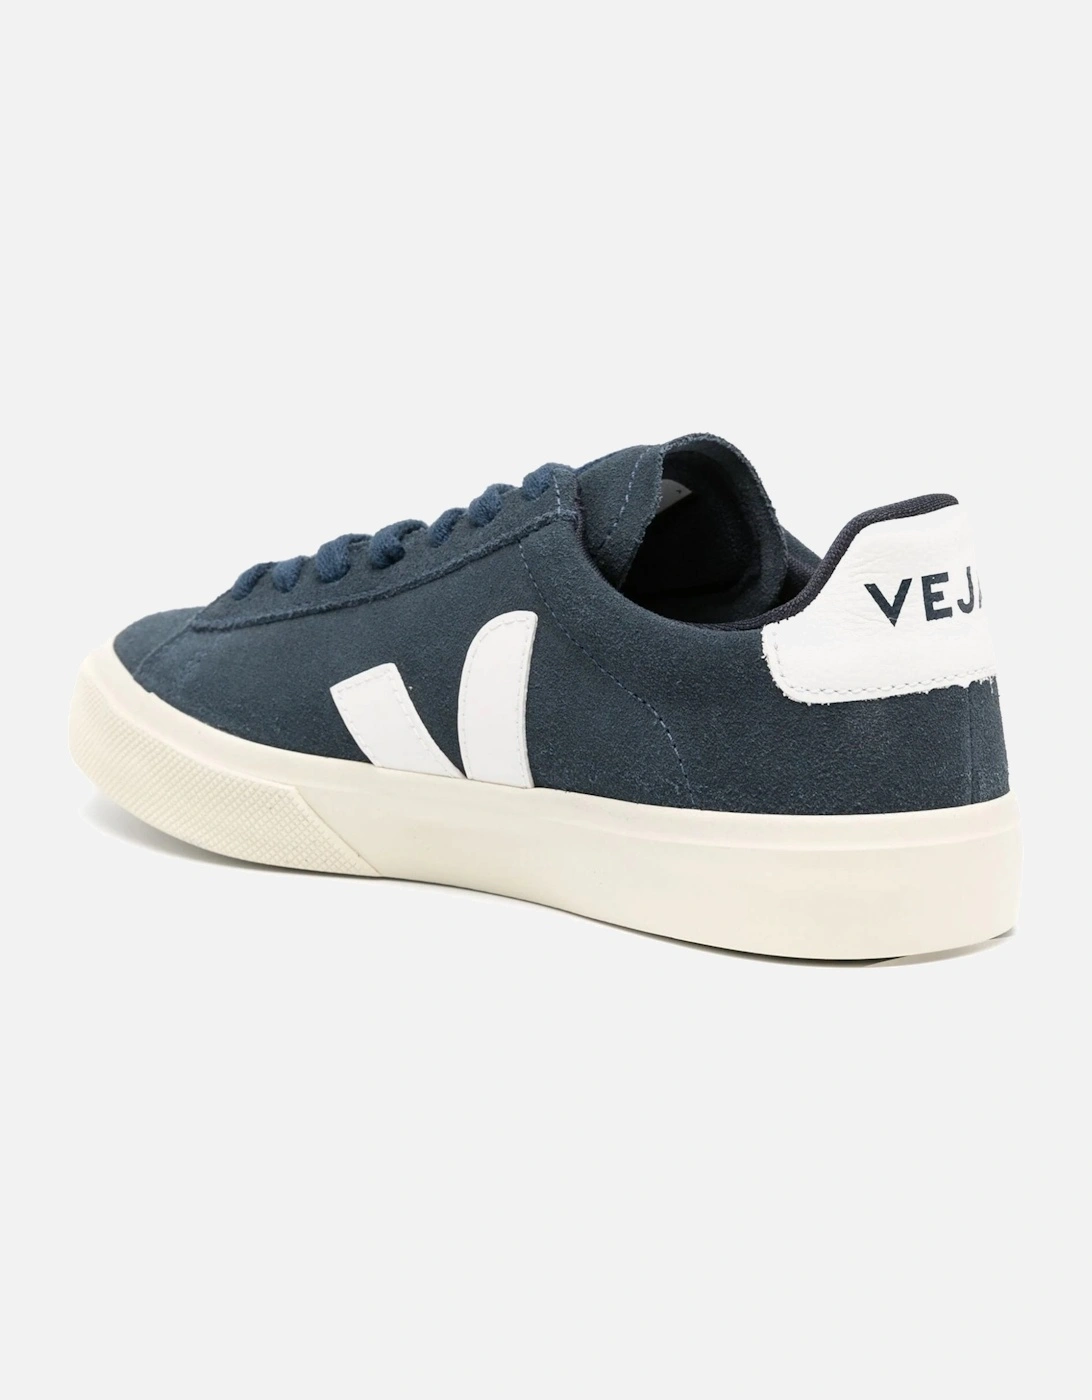 Womens Campo Sneakers Navy